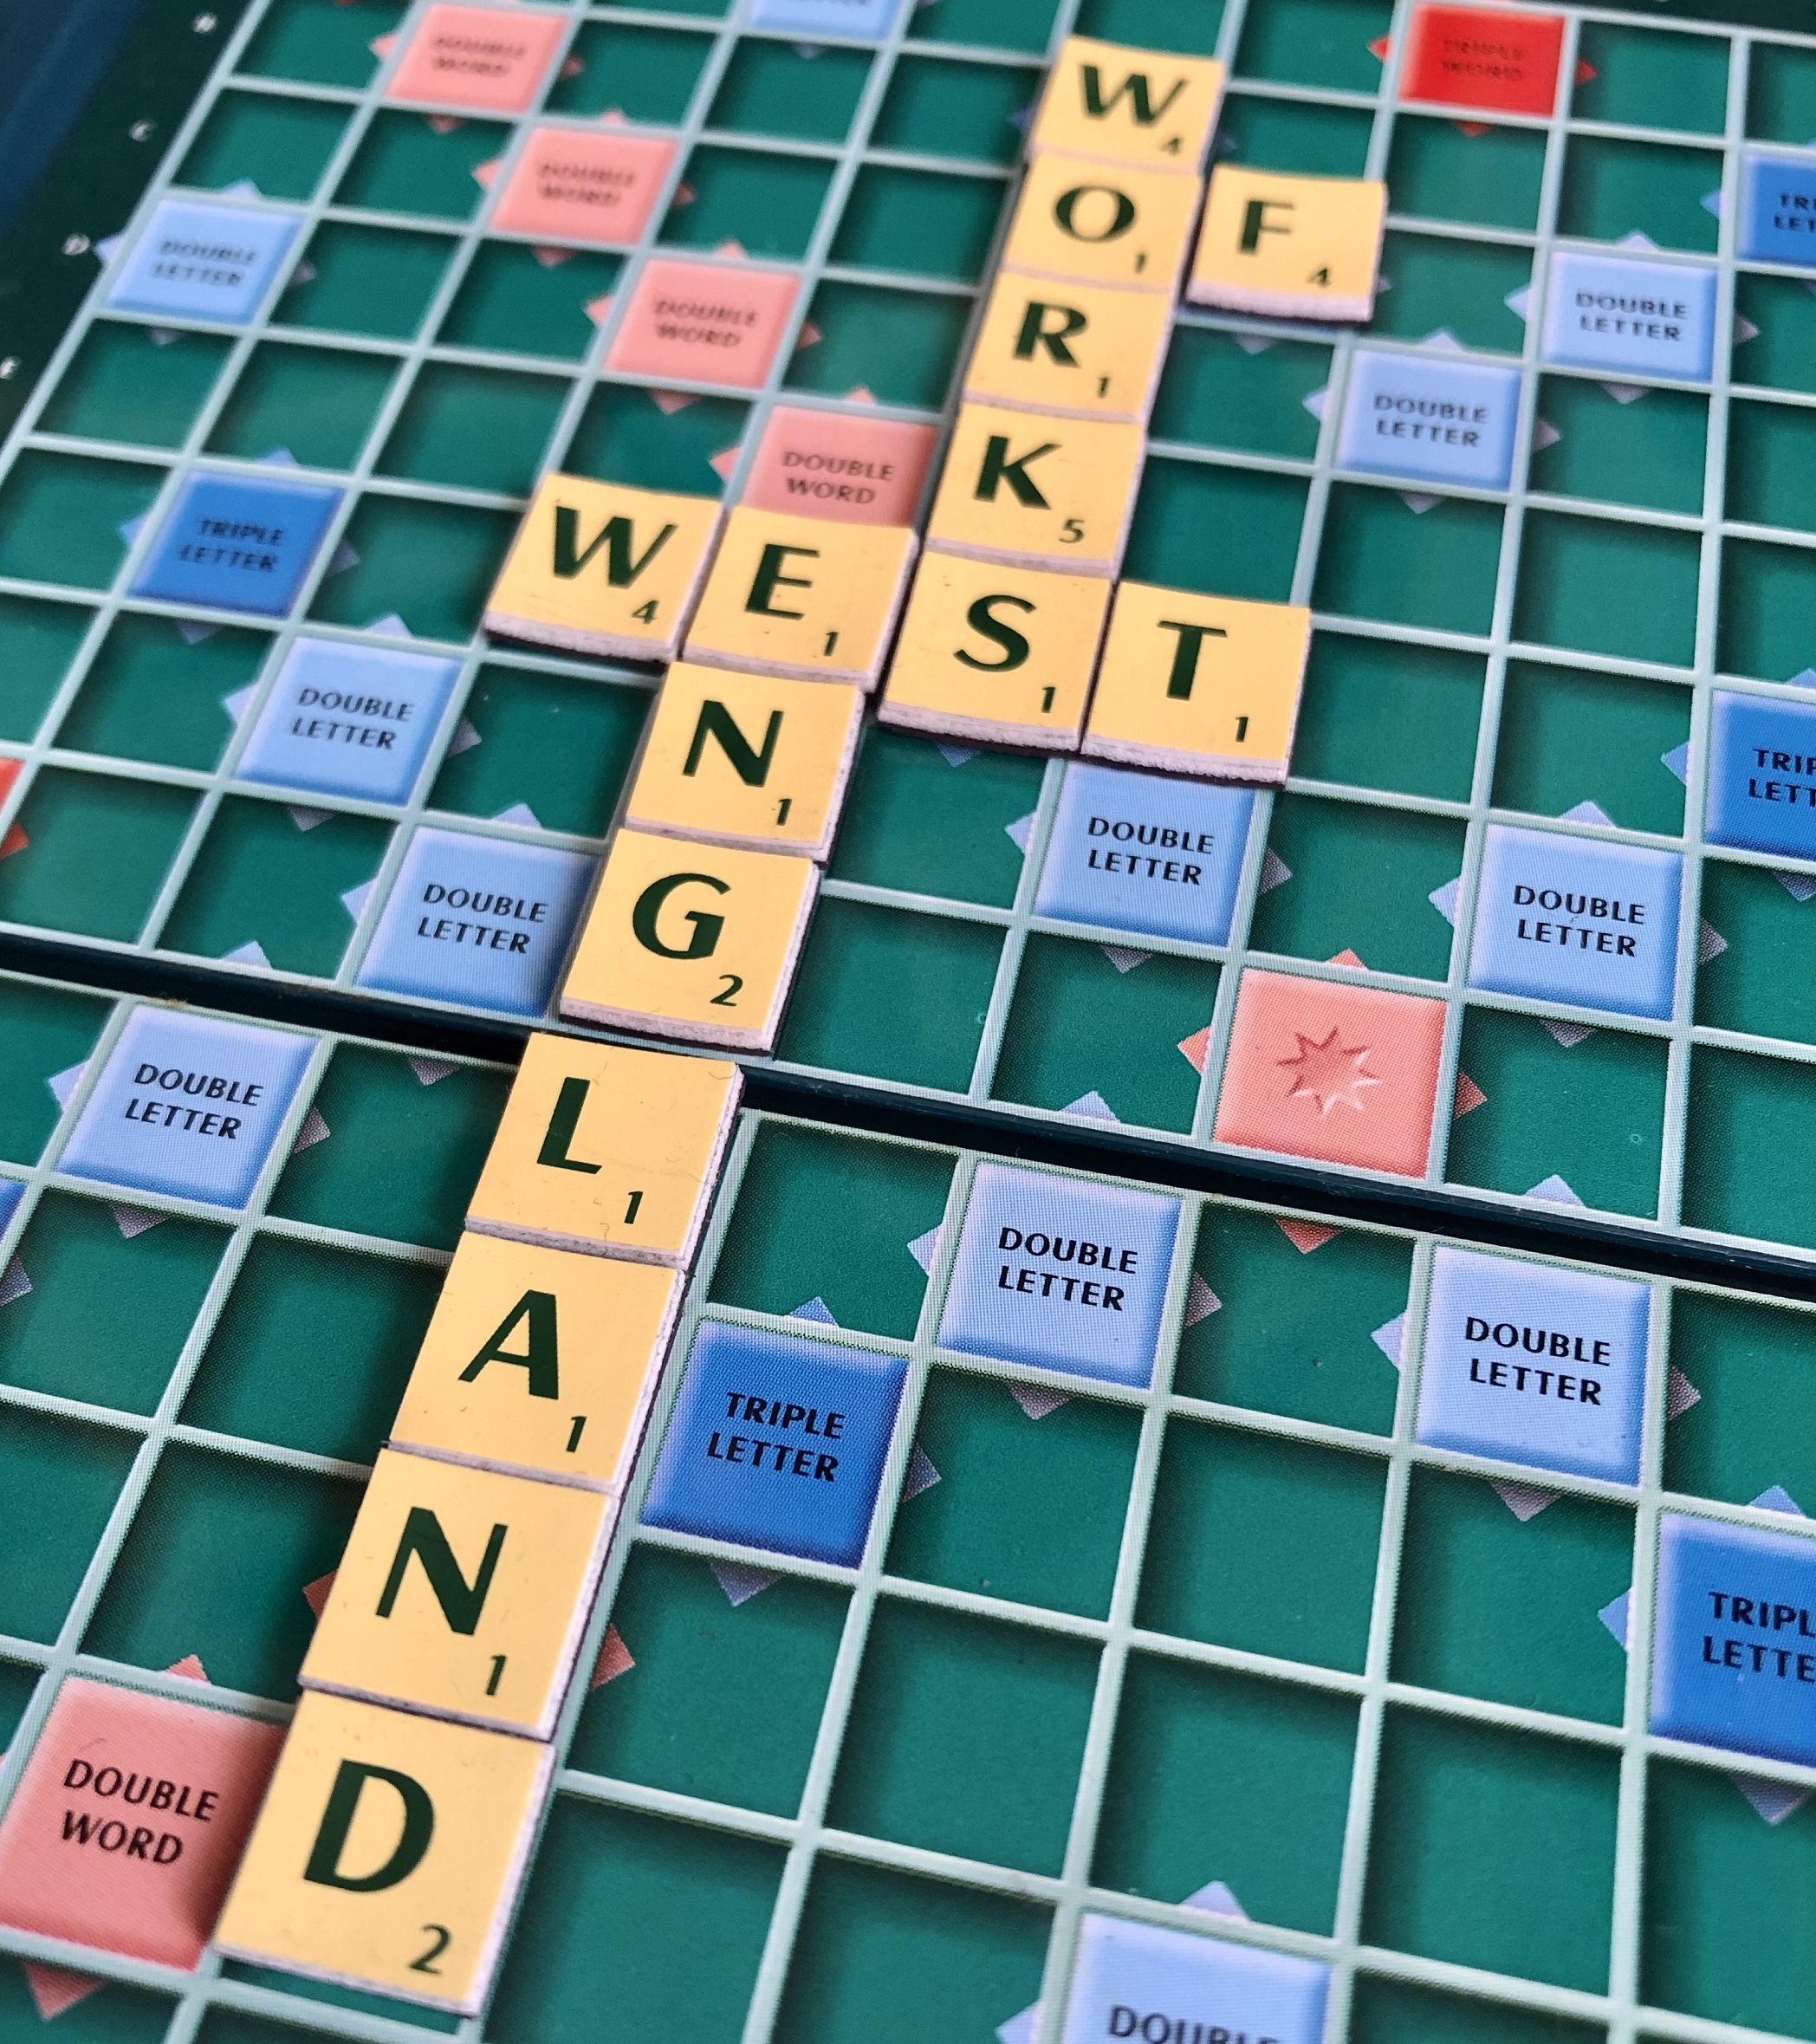 west of England works on scrabble board